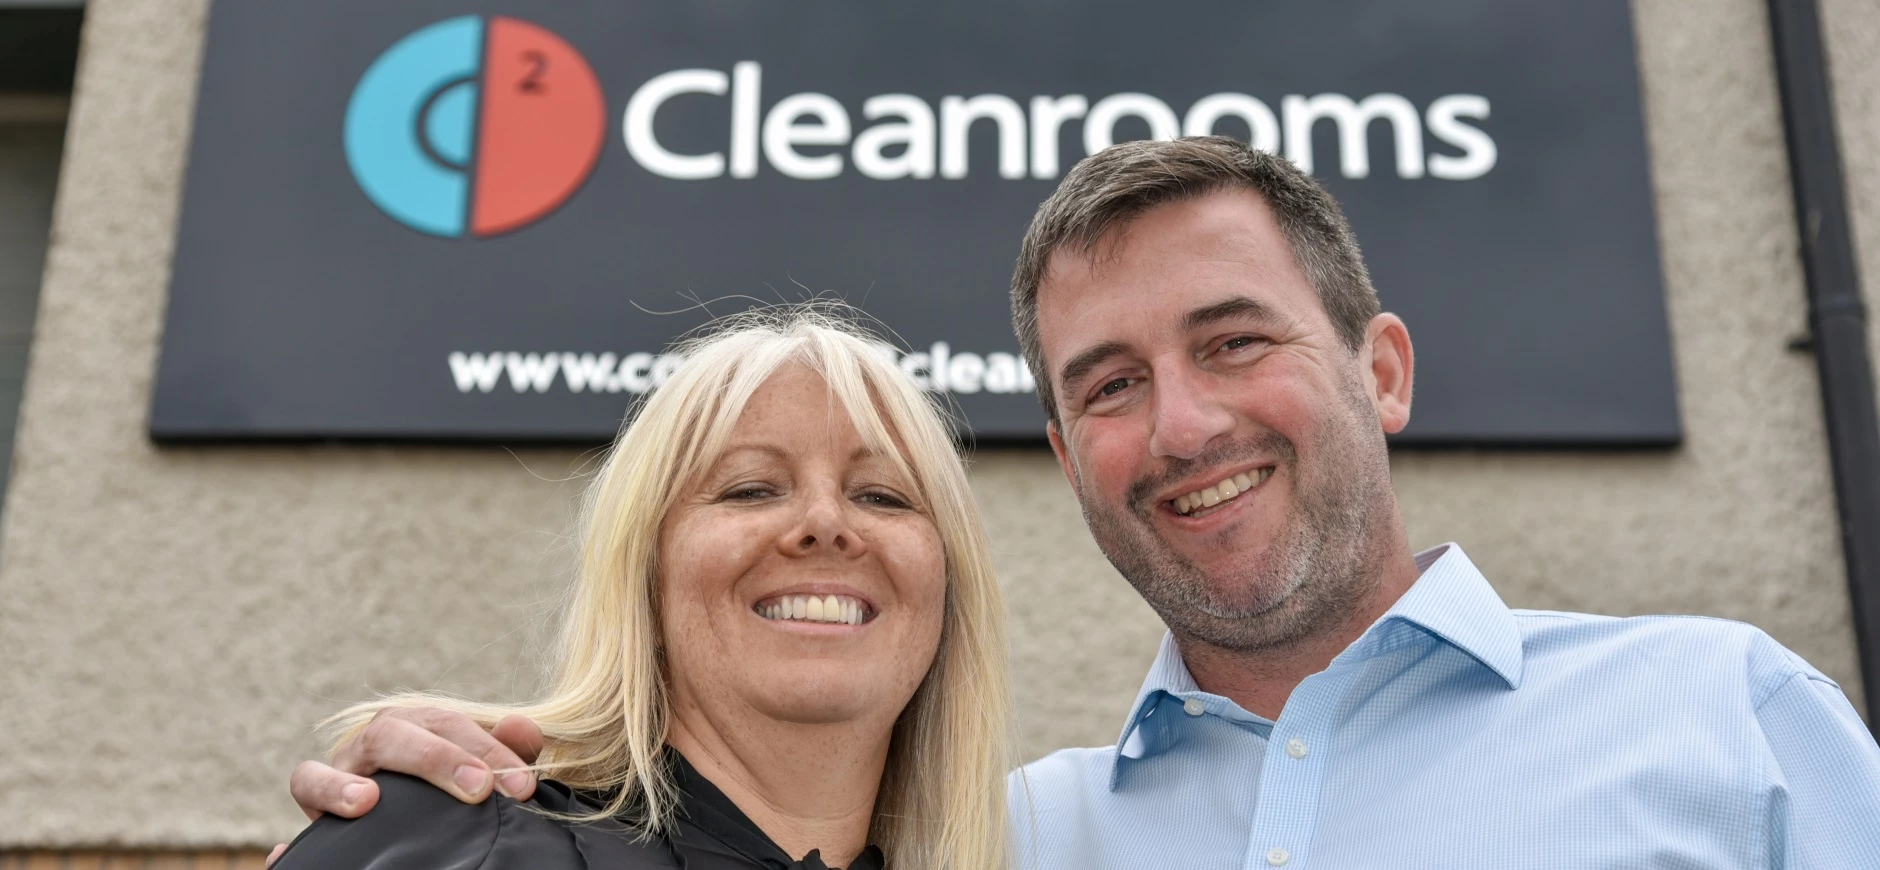 Lizzie and Joe Govier, Connect 2 Cleanrooms